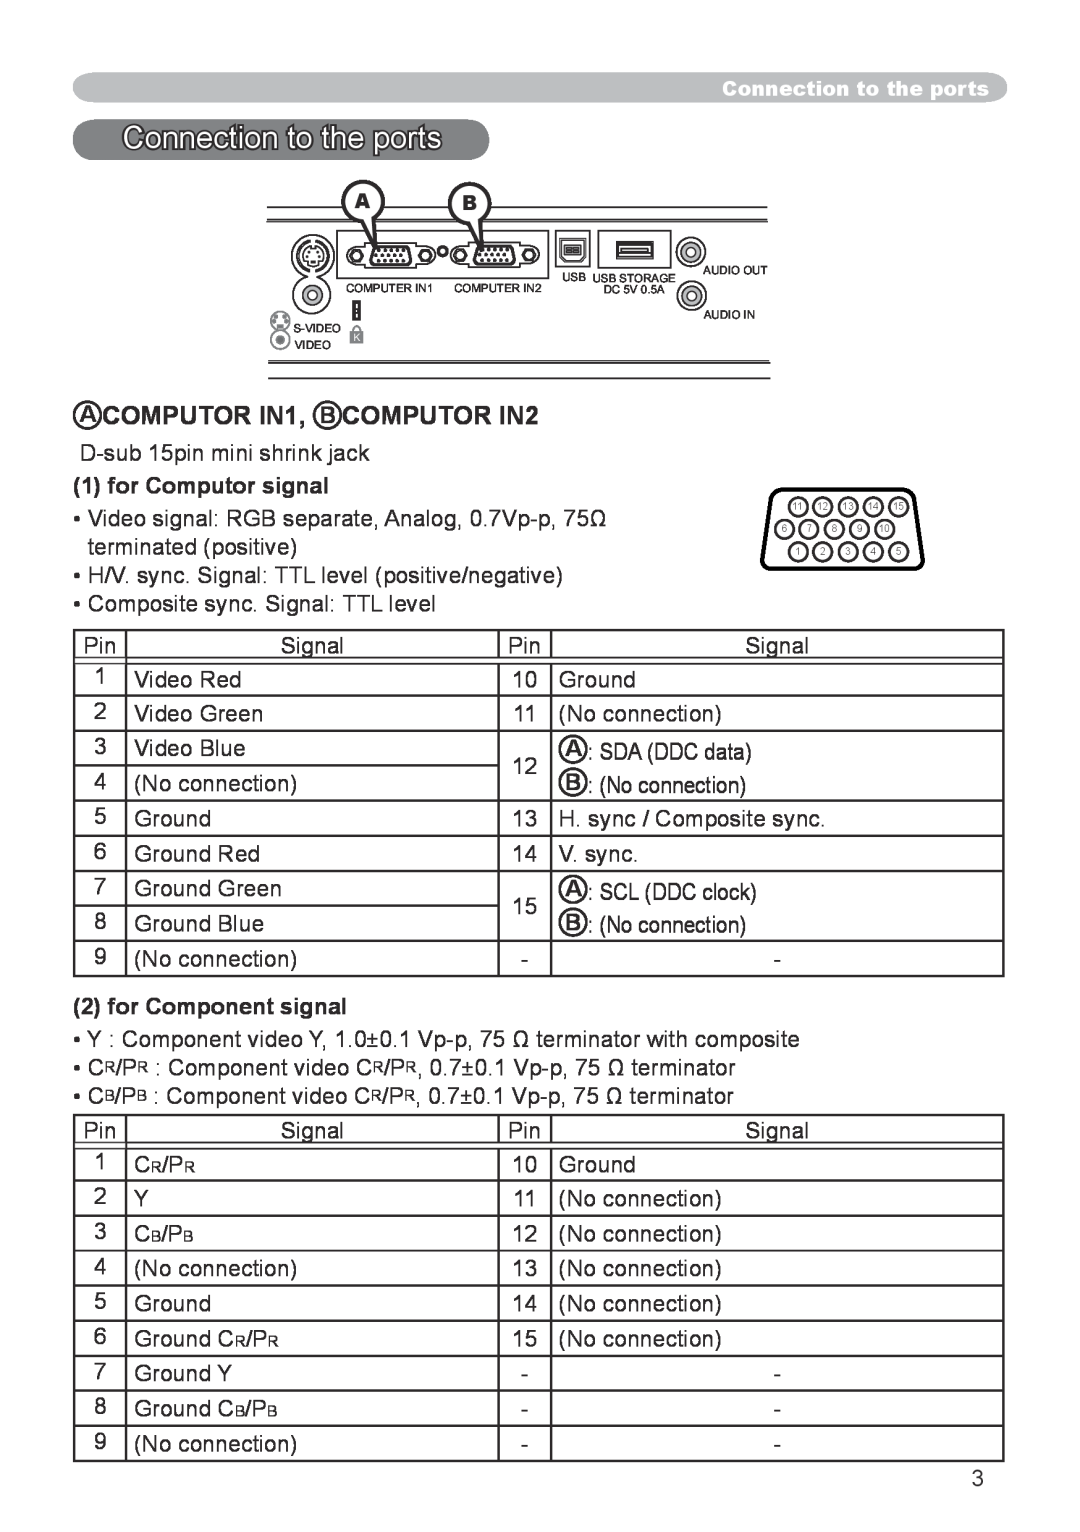 Dukane 8786 user manual Connection to the ports, A COMPUTOR IN1, B COMPUTOR IN2, for Computor signal, for Component signal 